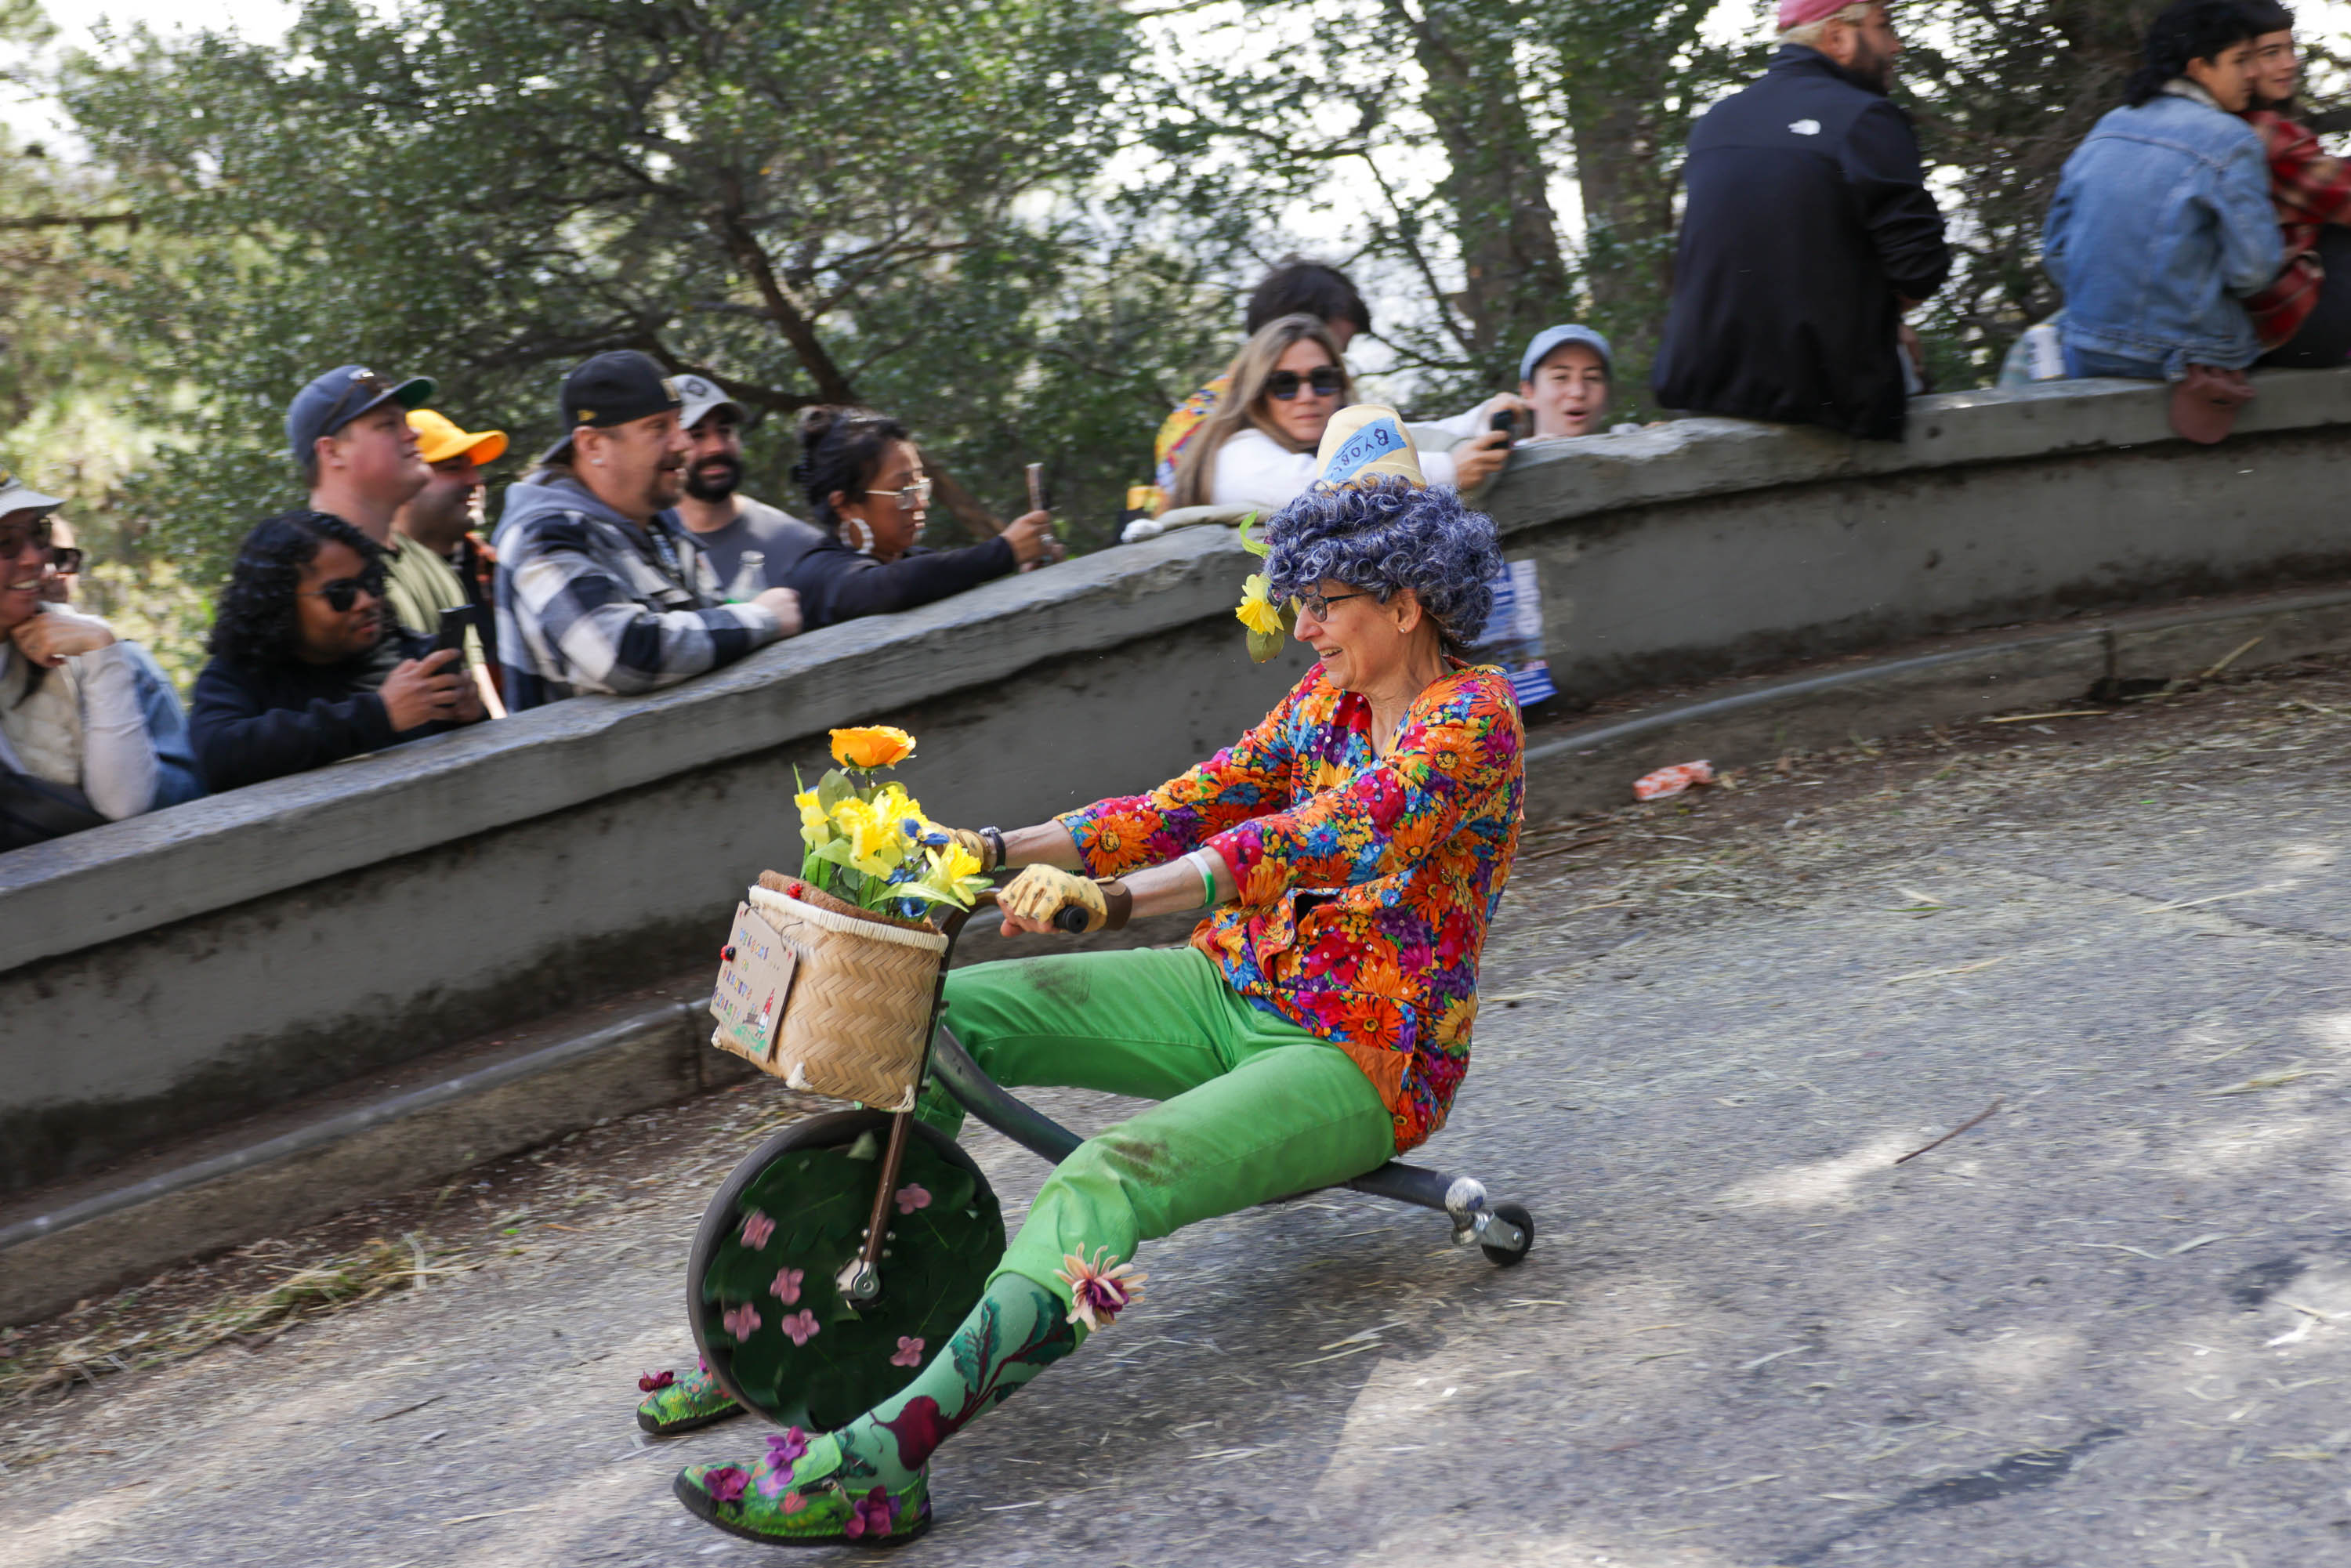 A person rides down a hill on a small tricycle, wearing bright attire with flowers, as onlookers in the background watch.